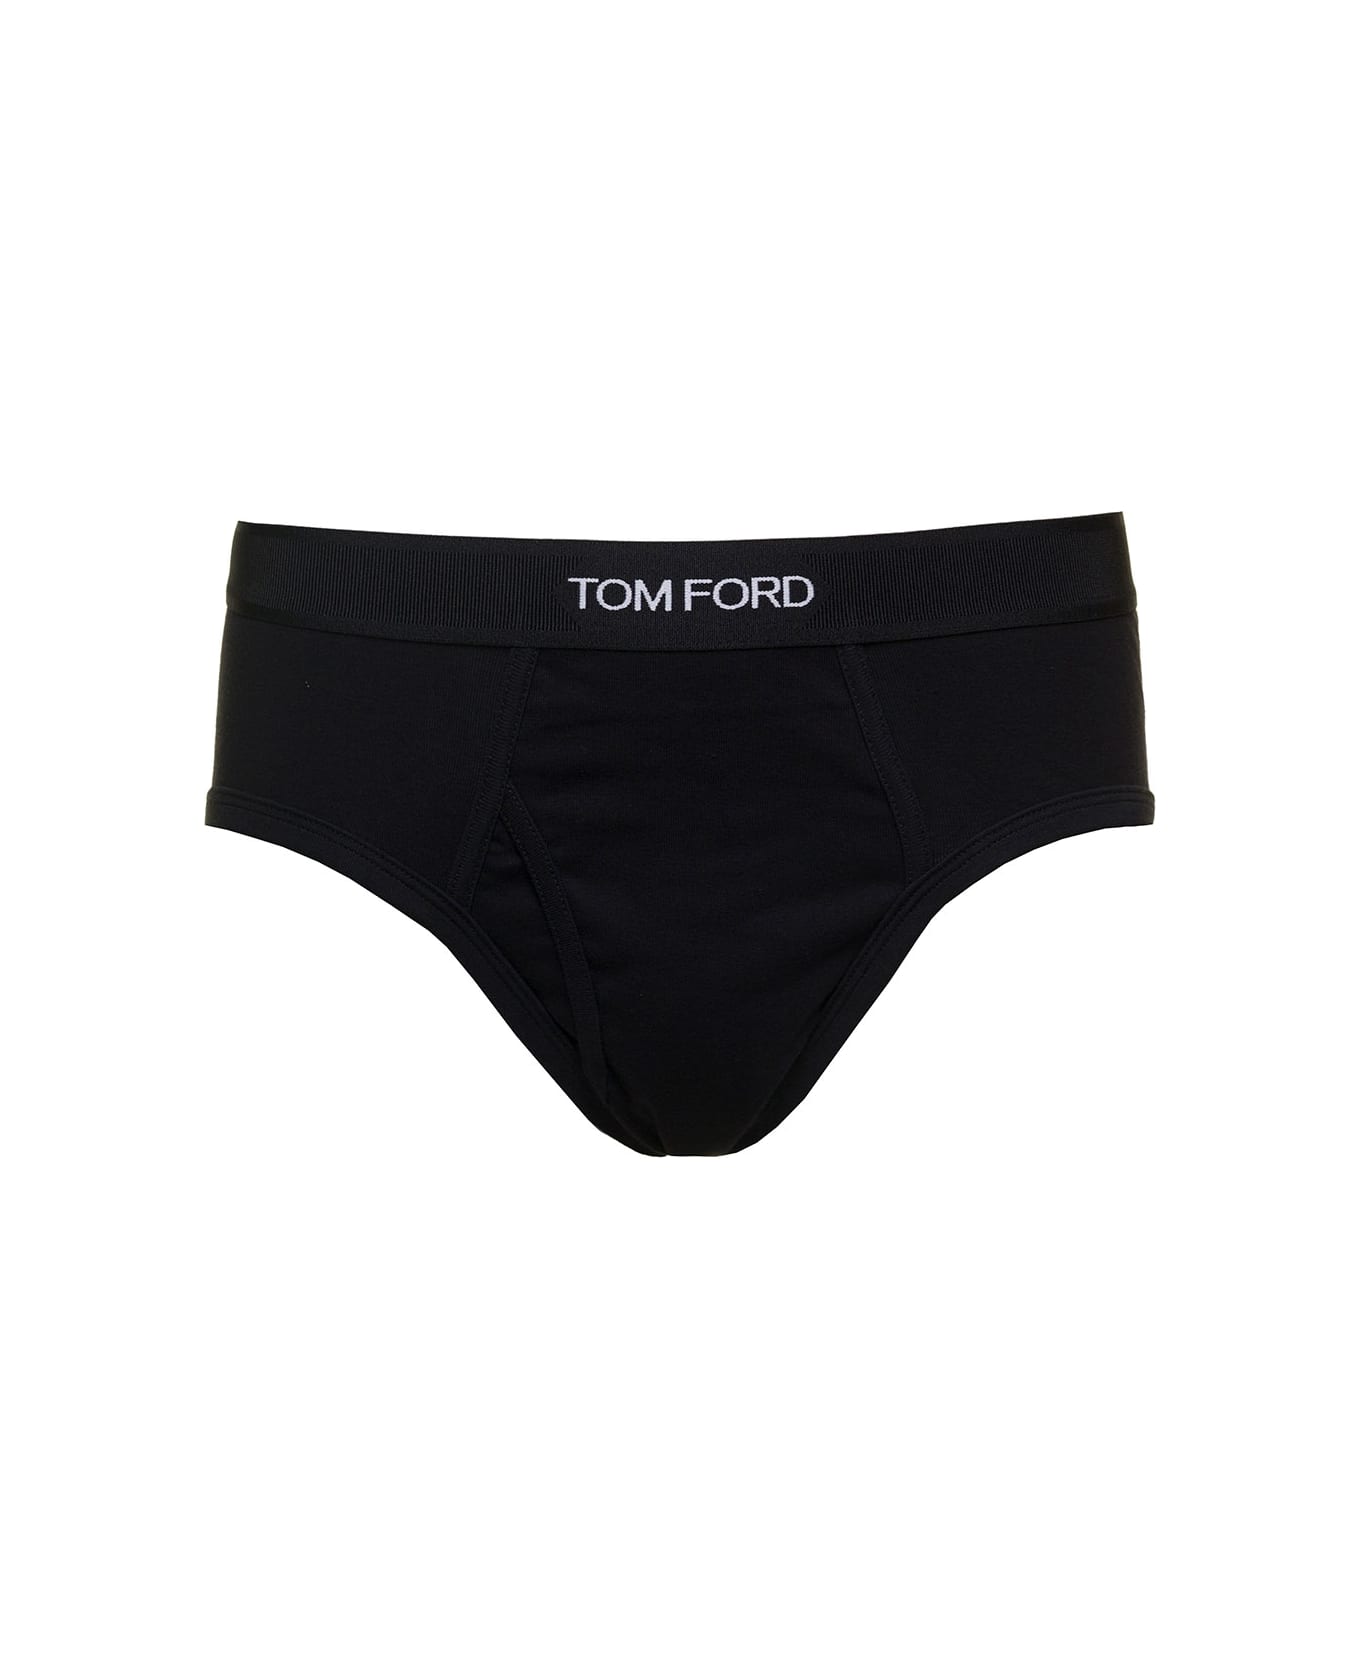 Tom Ford Black Briefs With Logged Waistband In Cotton Stretch Man - Black